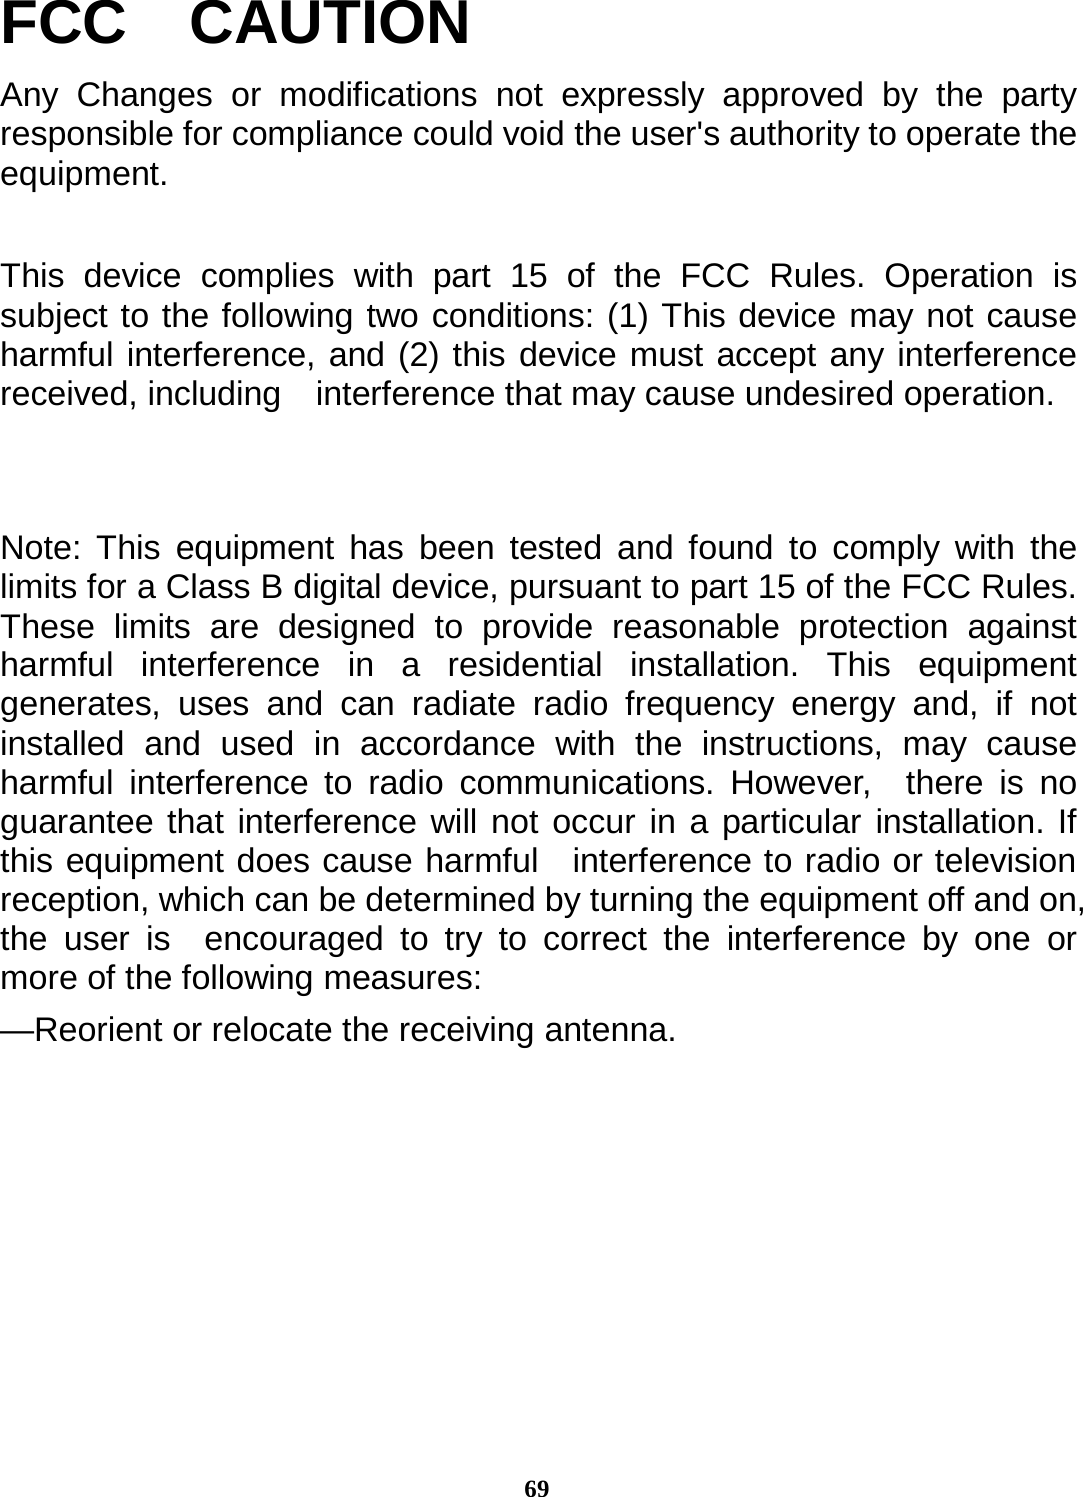 69FCC  CAUTION Any Changes or modifications not expressly approved by the party responsible for compliance could void the user&apos;s authority to operate the equipment.  This device complies with part 15 of the FCC Rules. Operation is subject to the following two conditions: (1) This device may not cause harmful interference, and (2) this device must accept any interference received, including    interference that may cause undesired operation.   Note: This equipment has been tested and found to comply with the limits for a Class B digital device, pursuant to part 15 of the FCC Rules. These limits are designed to provide reasonable protection against harmful interference in a residential installation. This equipment generates, uses and can radiate radio frequency energy and, if not installed and used in accordance with the instructions, may cause harmful interference to radio communications. However,  there is no guarantee that interference will not occur in a particular installation. If this equipment does cause harmful  interference to radio or television reception, which can be determined by turning the equipment off and on, the user is  encouraged to try to correct the interference by one or more of the following measures: —Reorient or relocate the receiving antenna. 